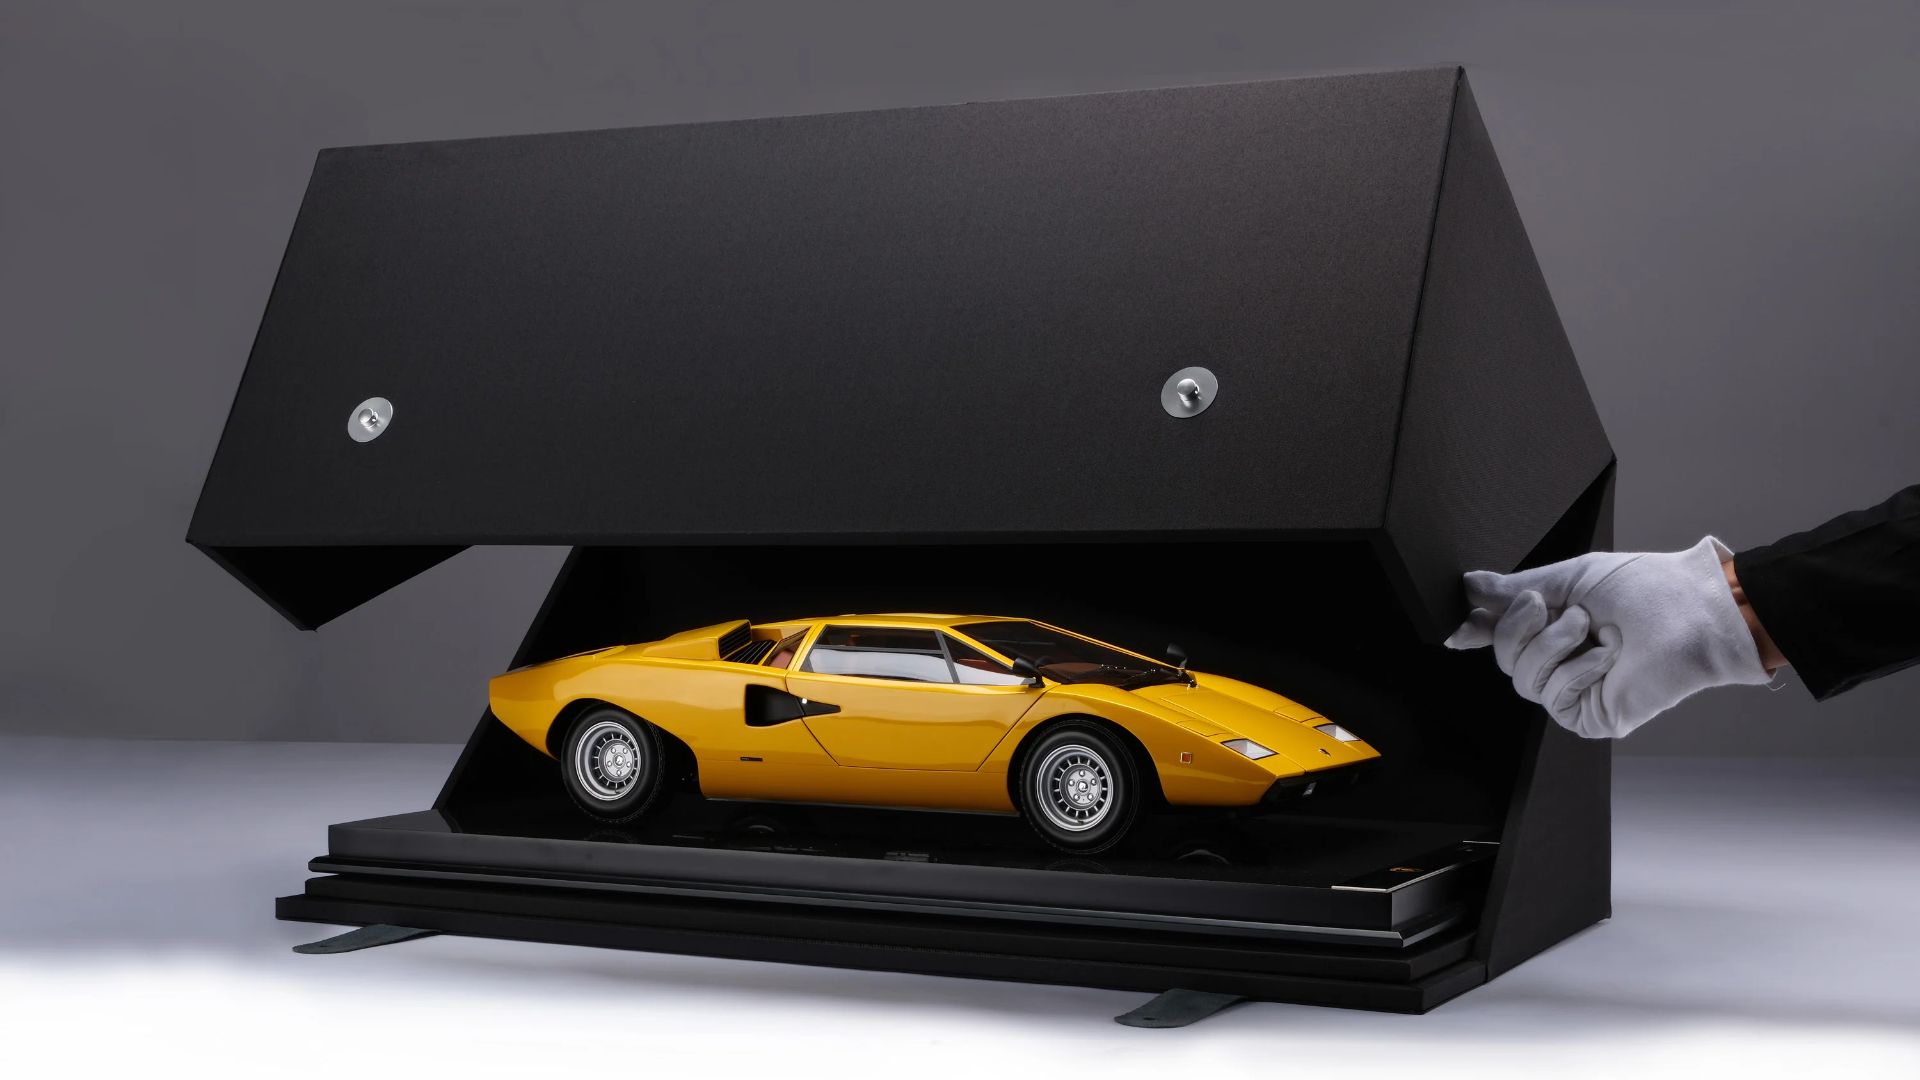 1:18 Scale Countach Is Pricier Than Some New Cars